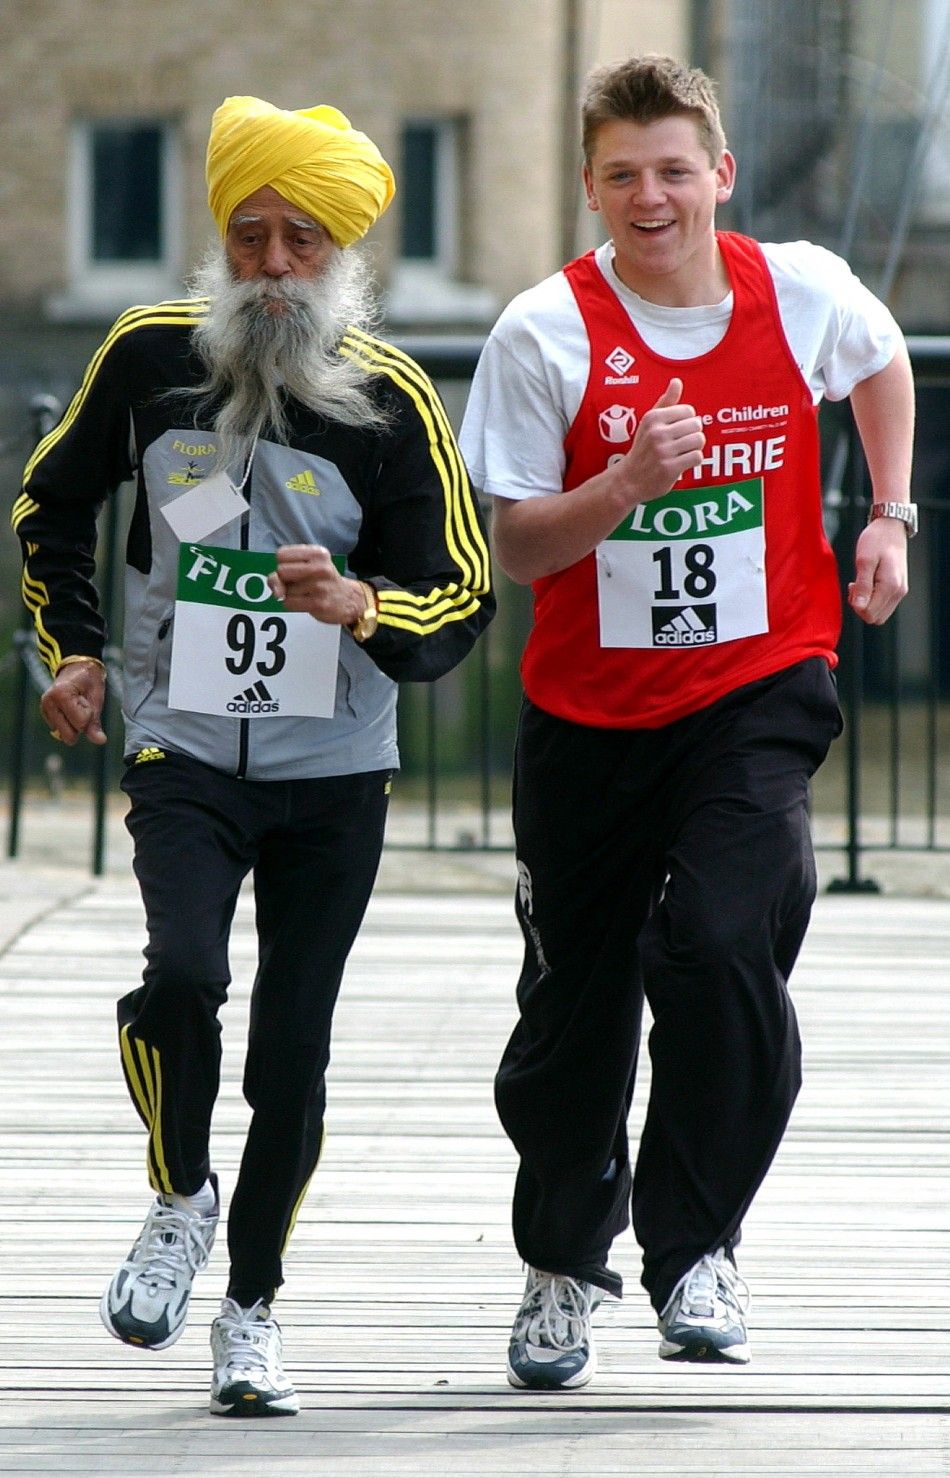 The oldest and youngest runners due to take part in the 2004 London Marathon, 93-year-old Fauja Singh L and Guthrie Brunton who will be 18 on race day, run together in east London, April 16, 2004. 